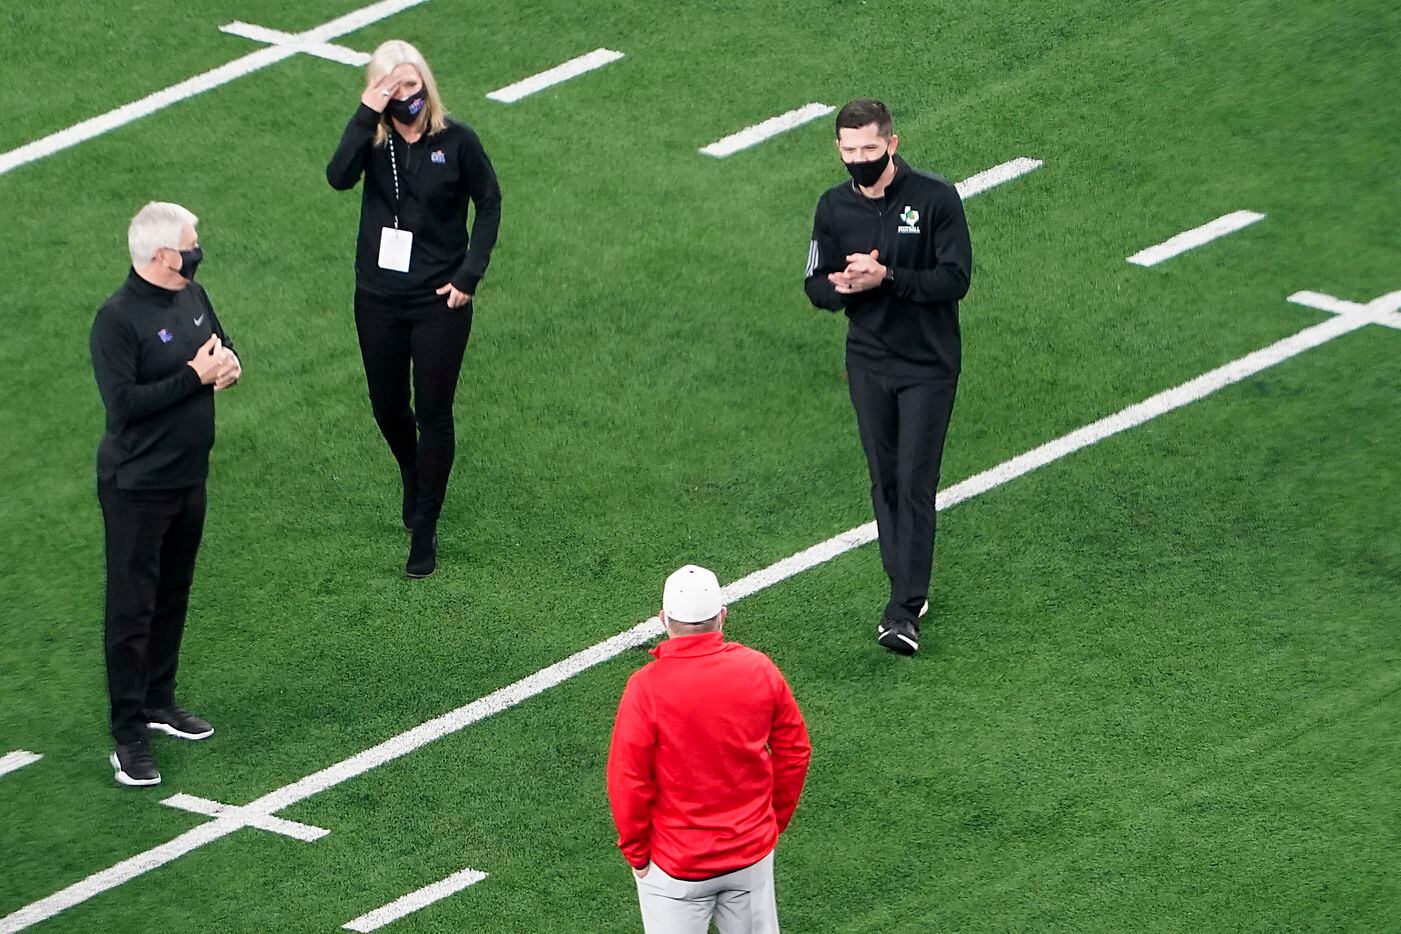 Southlake Carroll head coach Riley Dodge (top right) meets with his father, Austin Westlake head coach Todd Dodge (bottom) on the field before the two teams play for the Class 6A Division I state football championship at AT&T Stadium on Saturday, Jan. 16, 2021, in Arlington, Texas. (Smiley N. Pool/The Dallas Morning News)